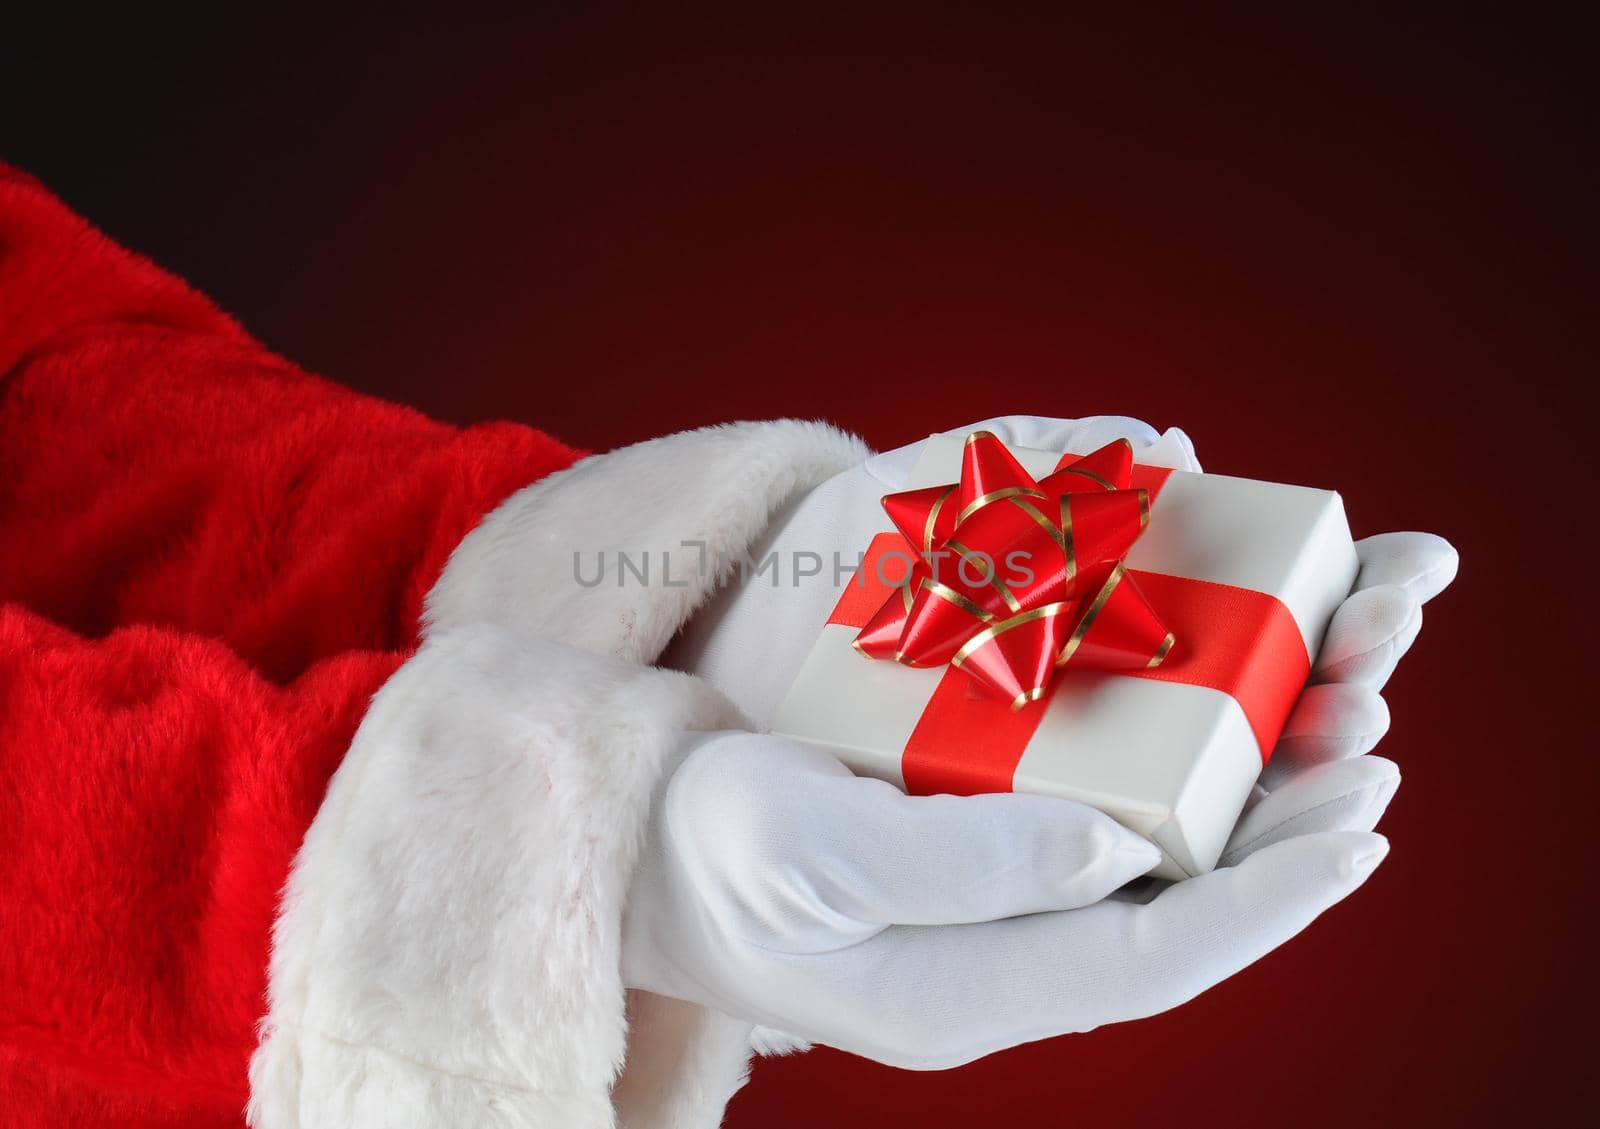 Santa Claus holding a small Christmas Present in both of his hands. Horizontal format showing only hand and arms on a light ot dark red background.